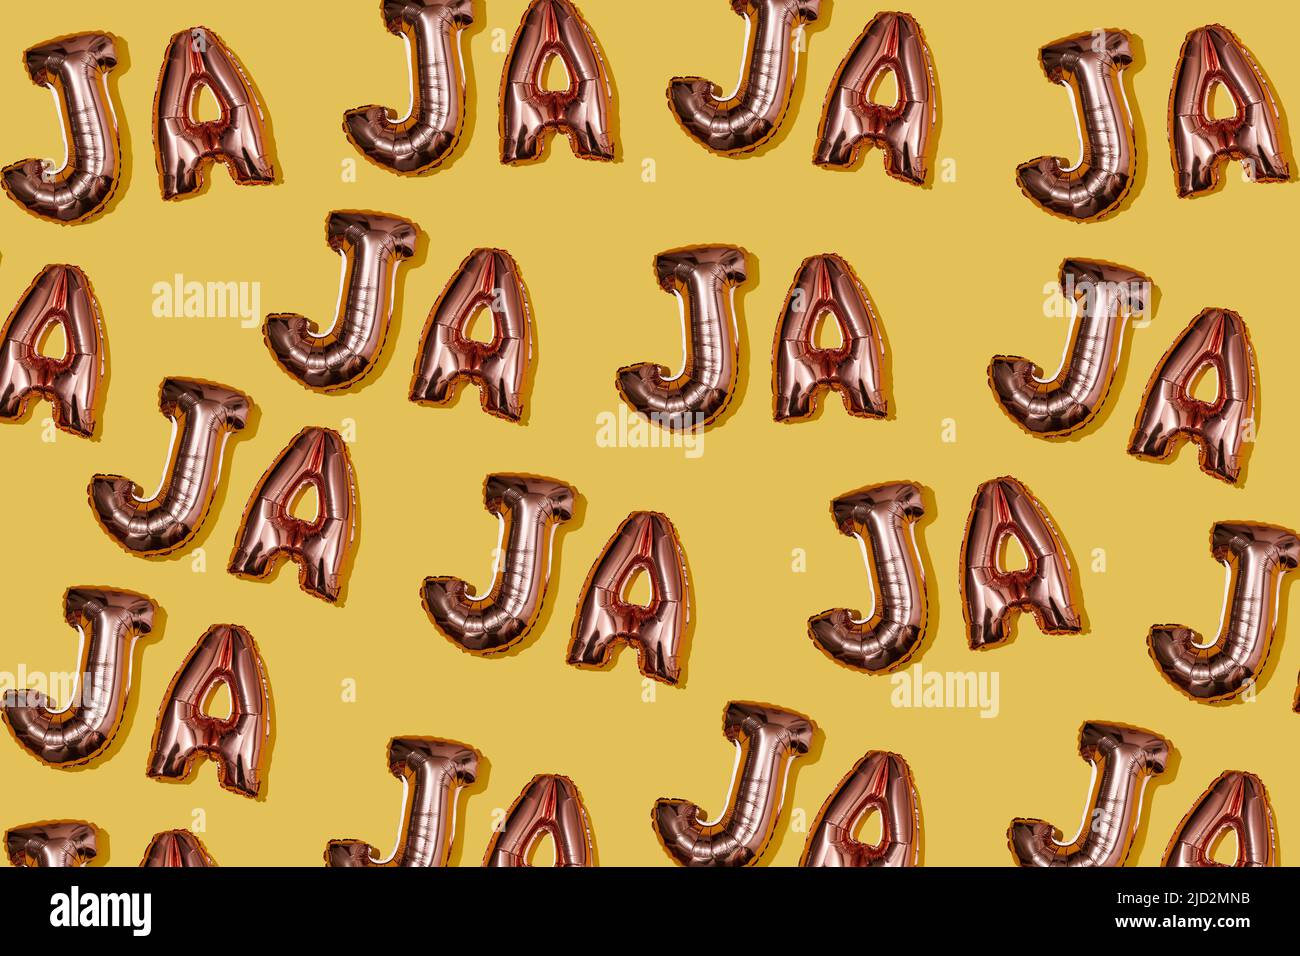 many metallic pink letter-shaped balloons forming the interjection ja ja ja, representation of laughter in spanish, repeatedly on a yellow background Stock Photo